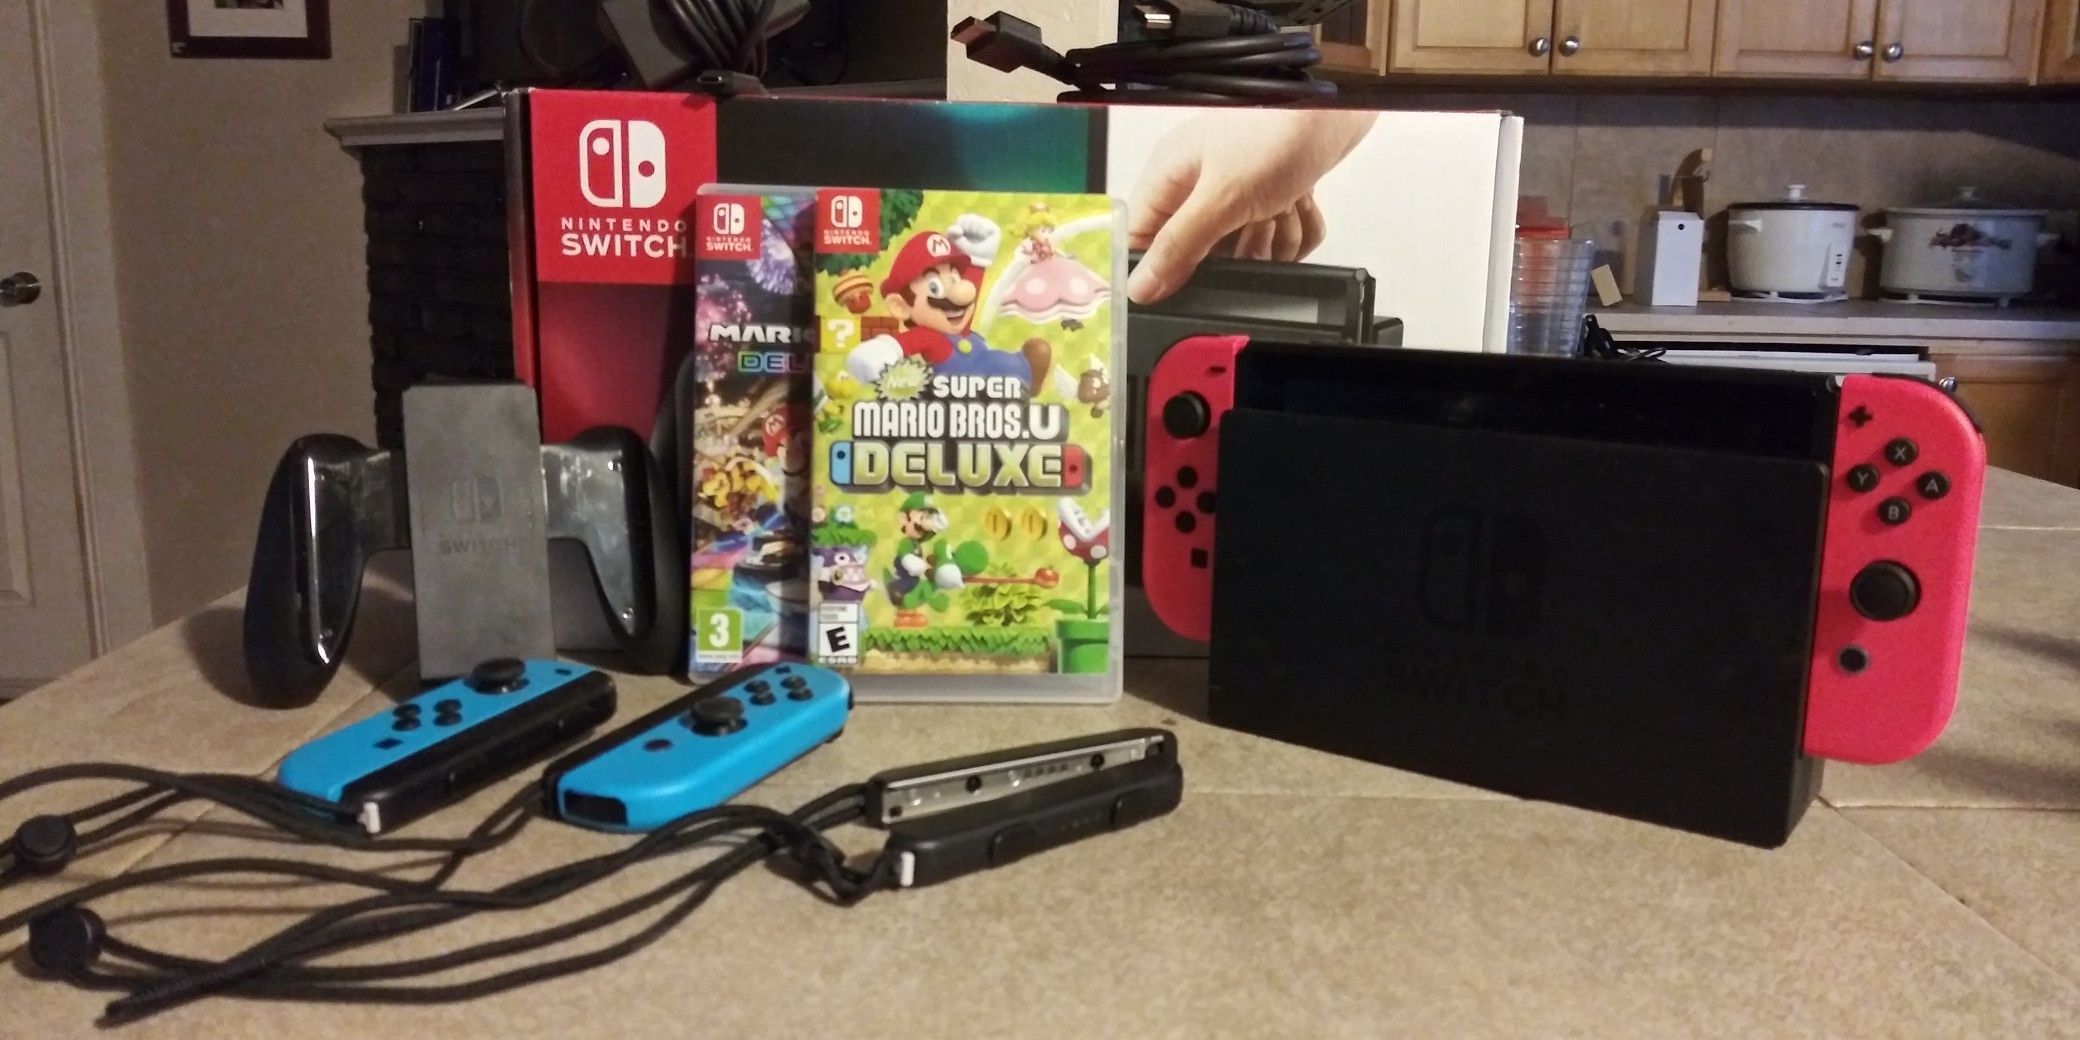 Nintendo Switch like new with games and extra controllers